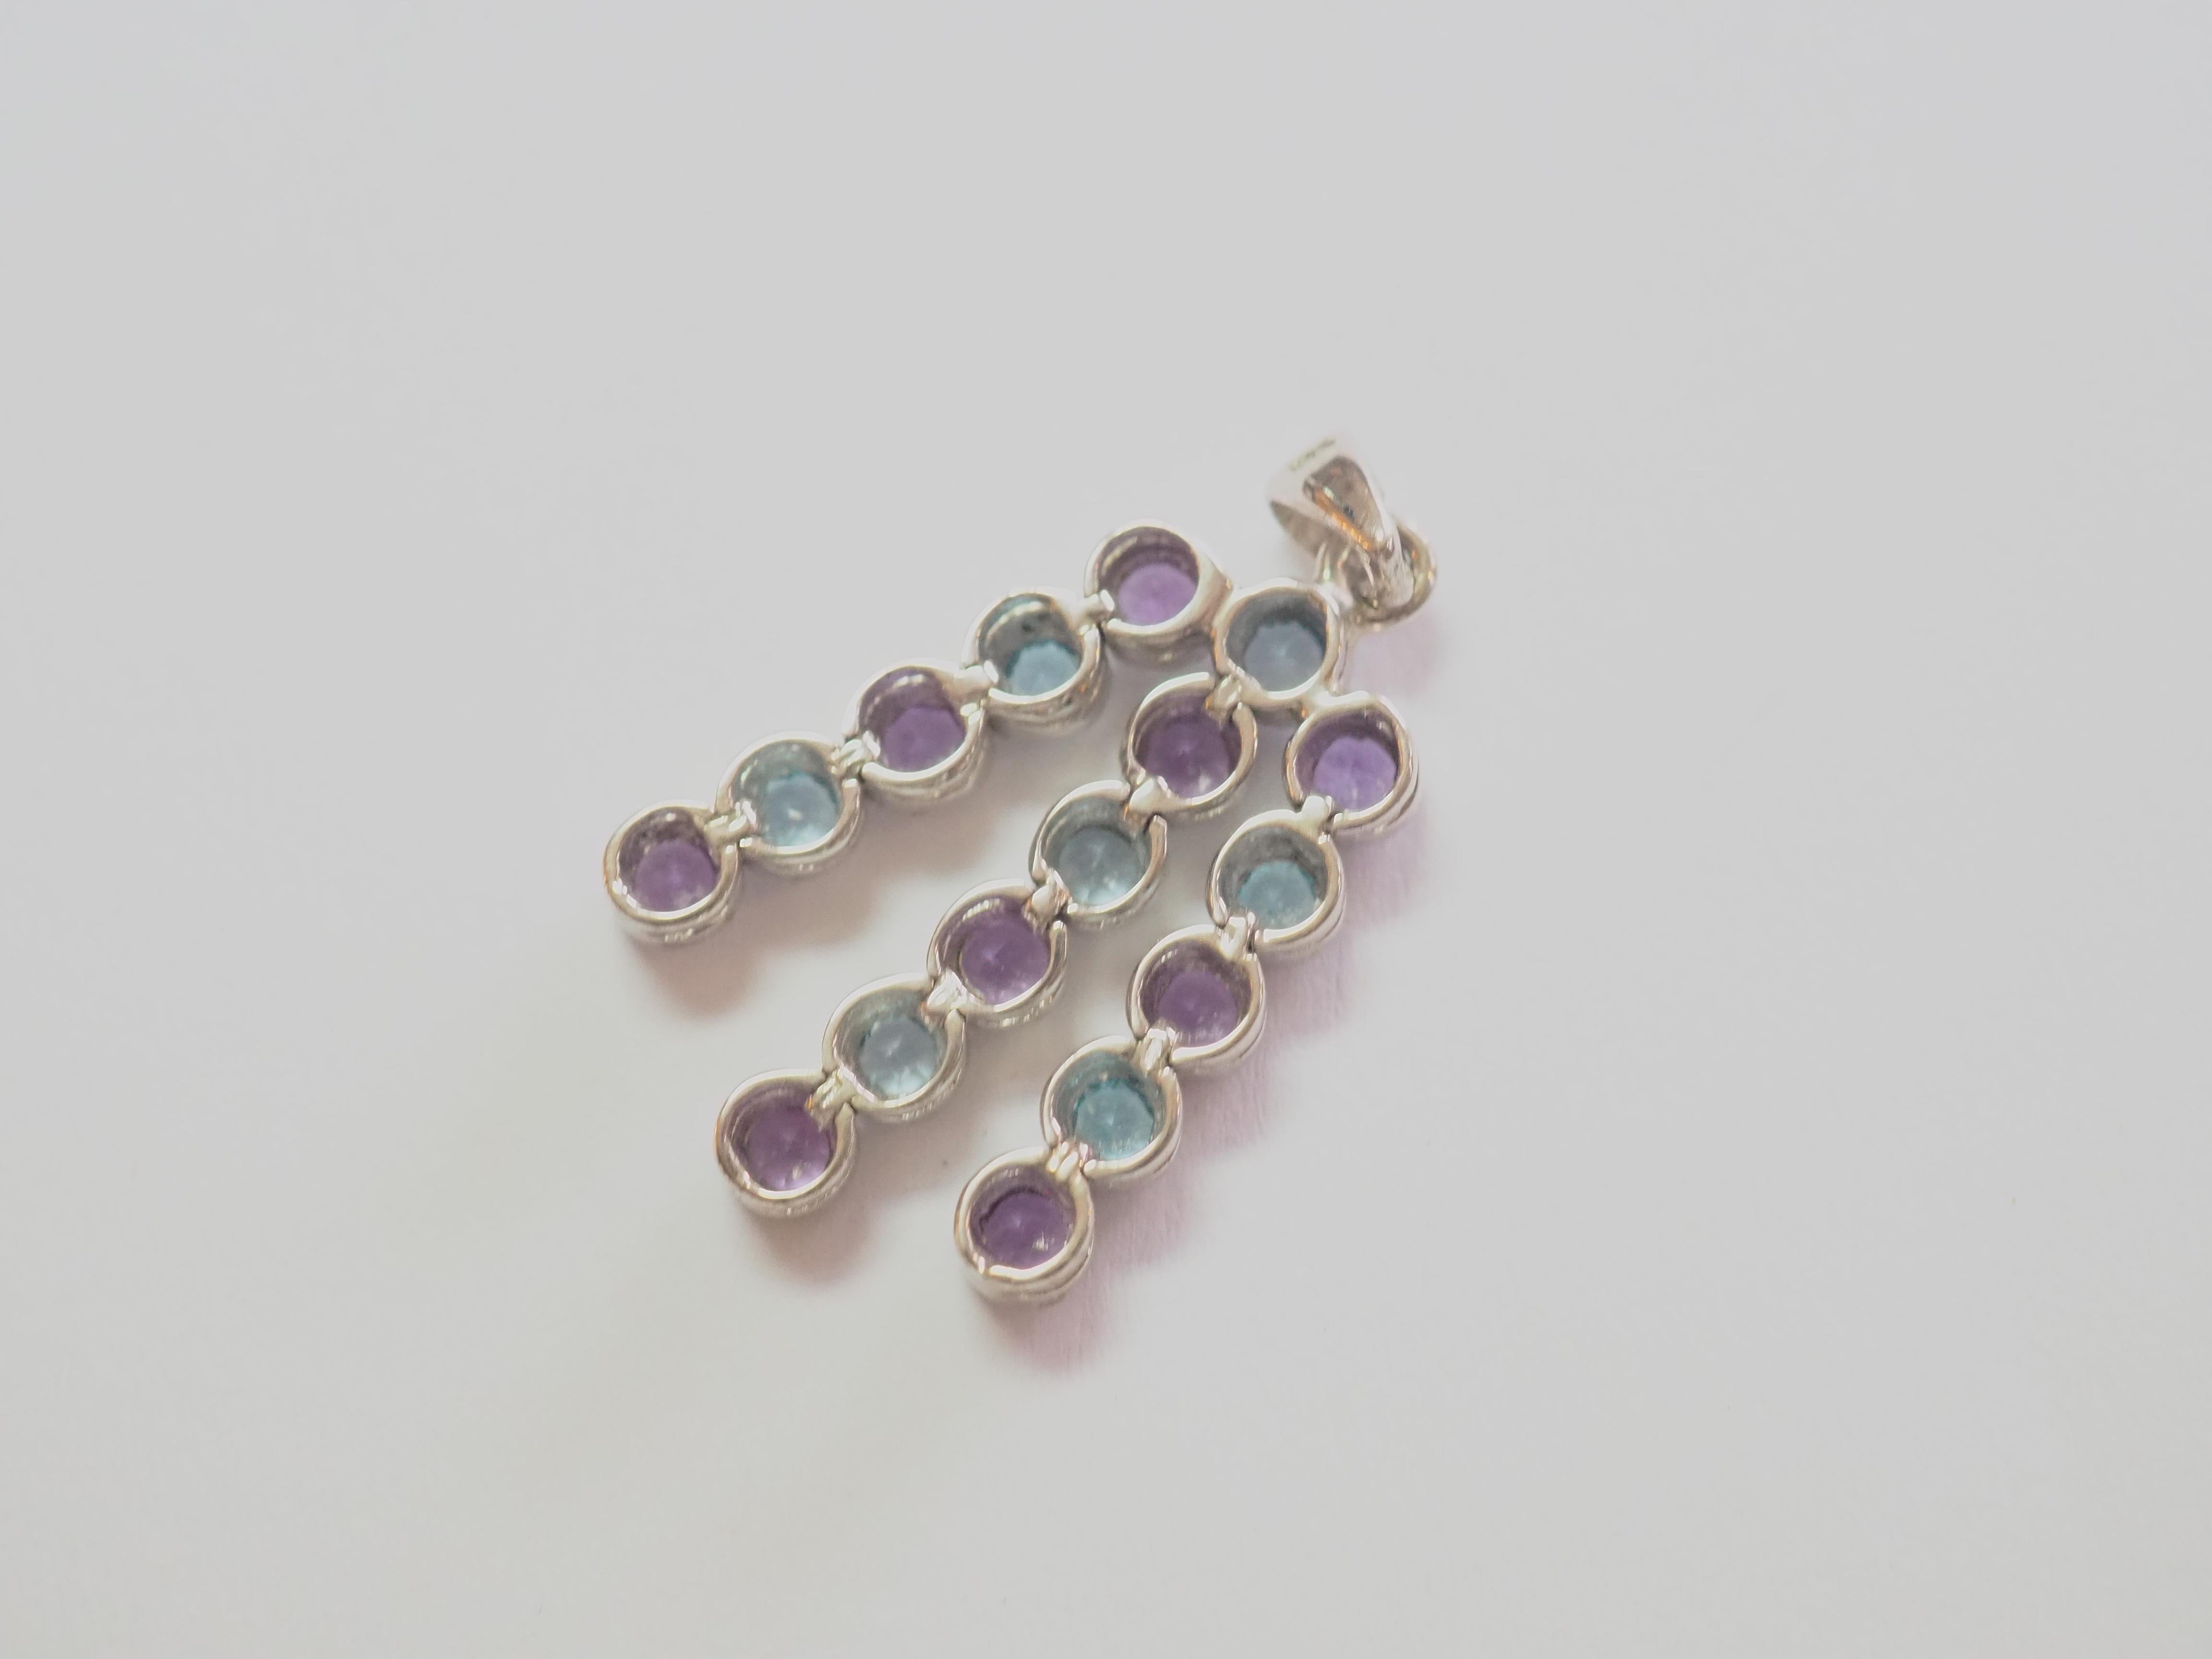 A very beautiful and delicate dangling pendant in sterling silver for wearing everyday. The pendant includes 7 round blue topaz and 9 round purple amethysts set in bezel and arranged masterfully. The piece is made in the early turn of the century